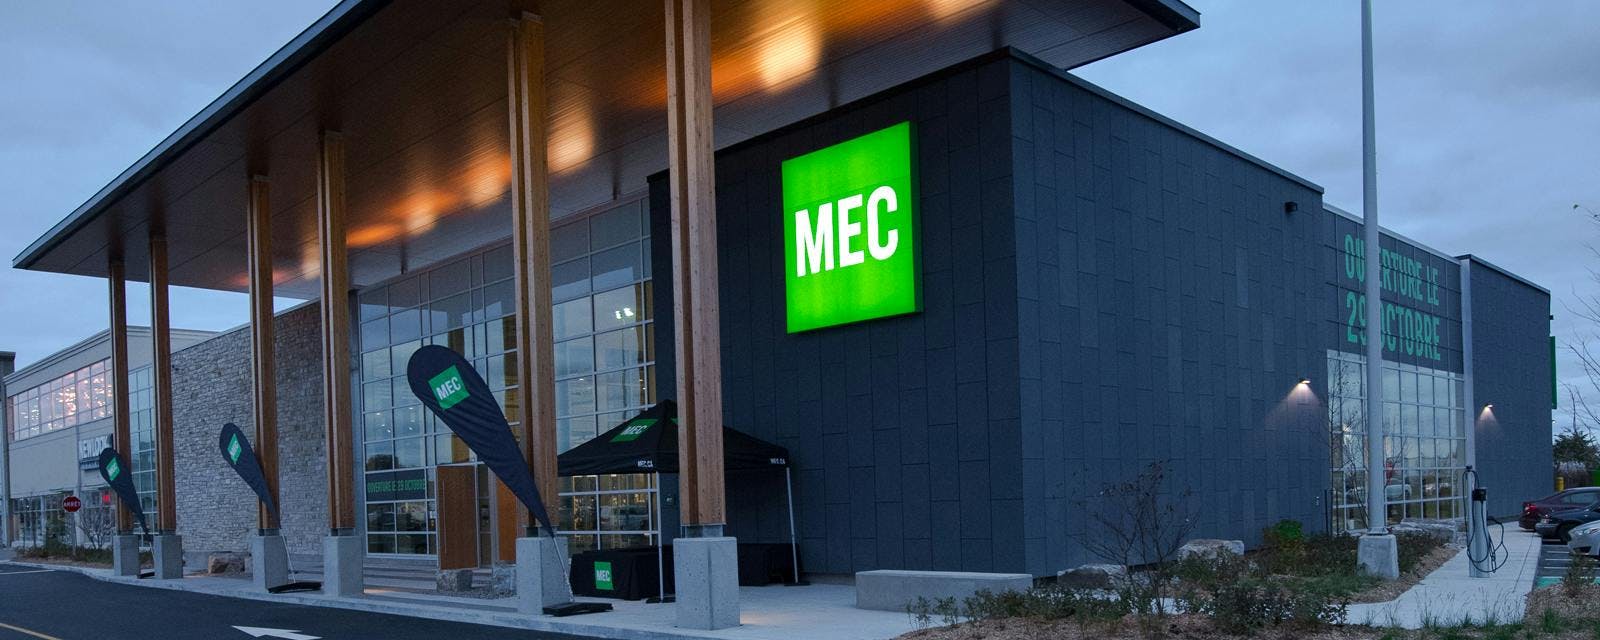 If you love trails, snow, water or fresh air, this is your store. Visit MEC Laval for outdoor gear, know-how and inspiration.